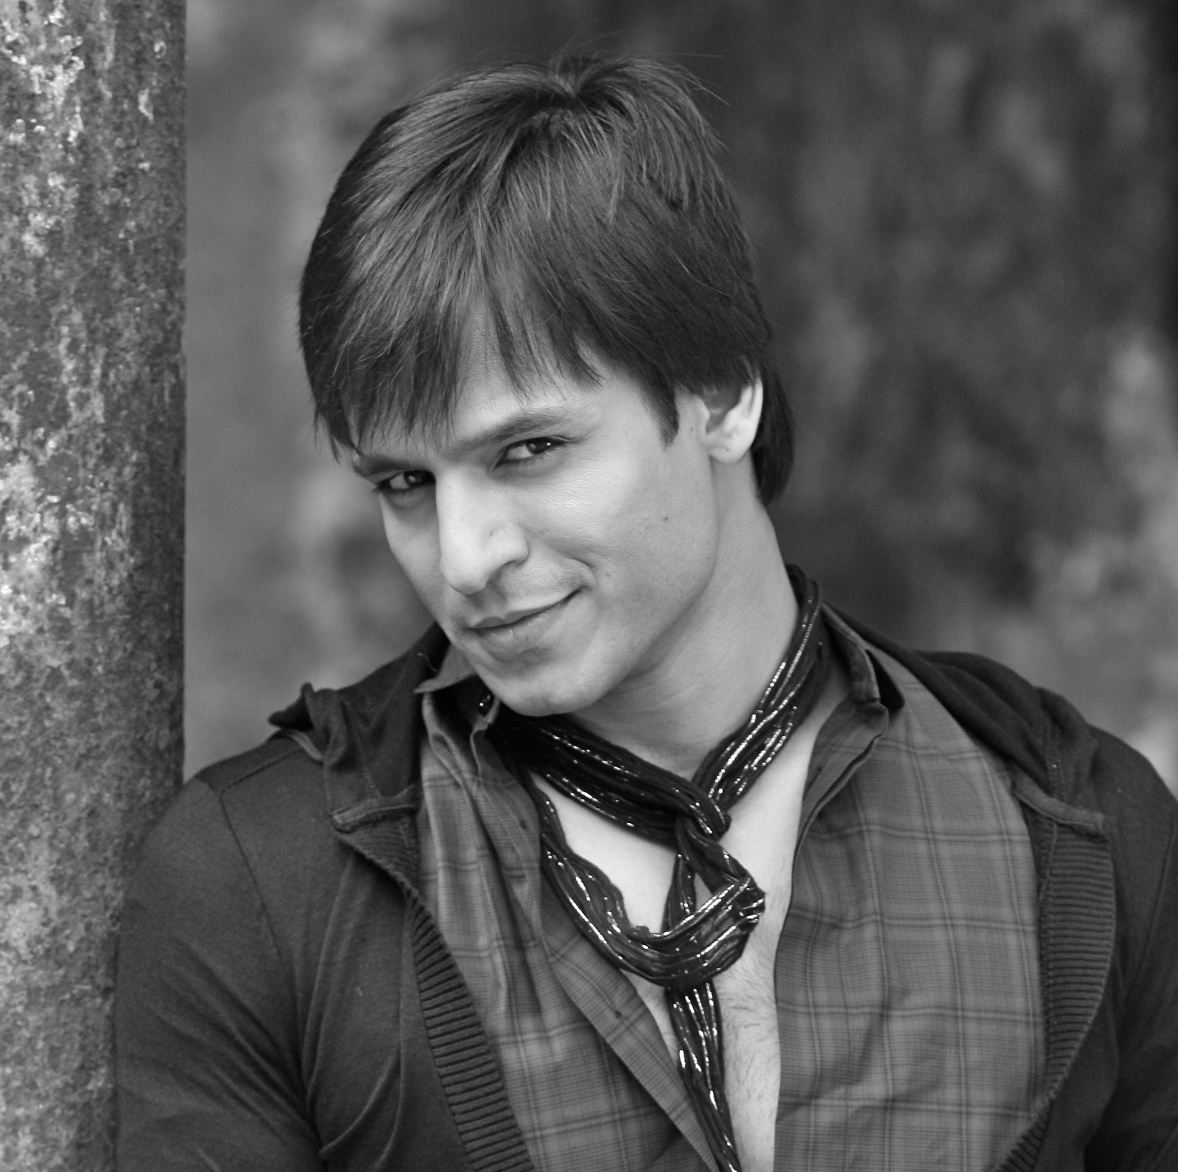 Vivek Oberoi said that Arunachal is ideal for Bollywood